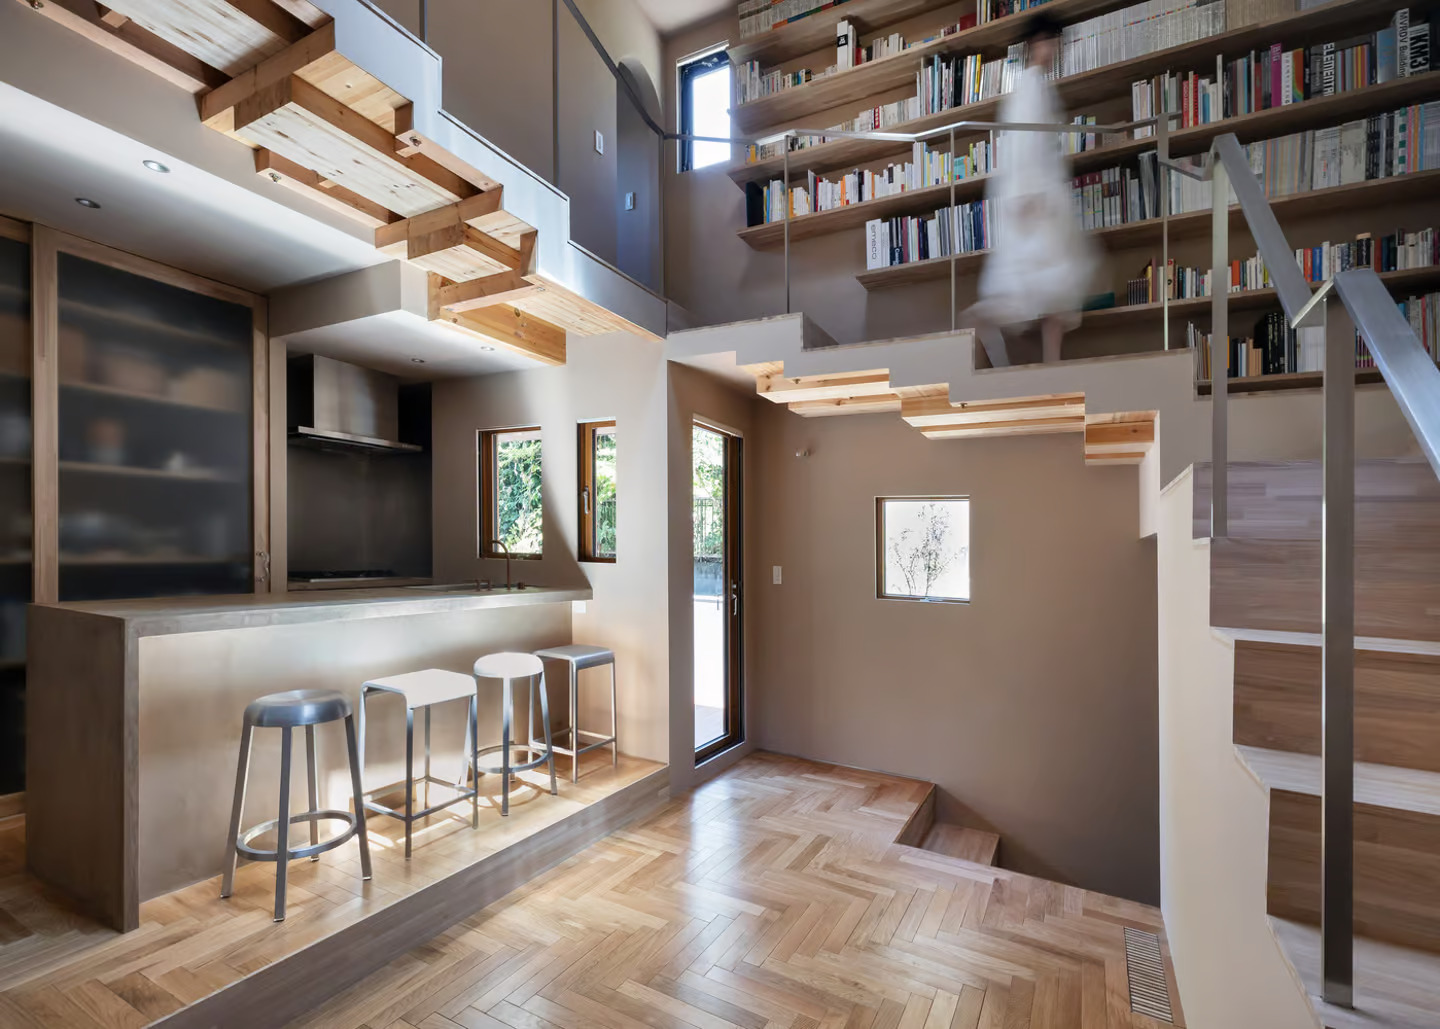 Japanese Cat-Centric Home: A Compact Living Space with Purpose